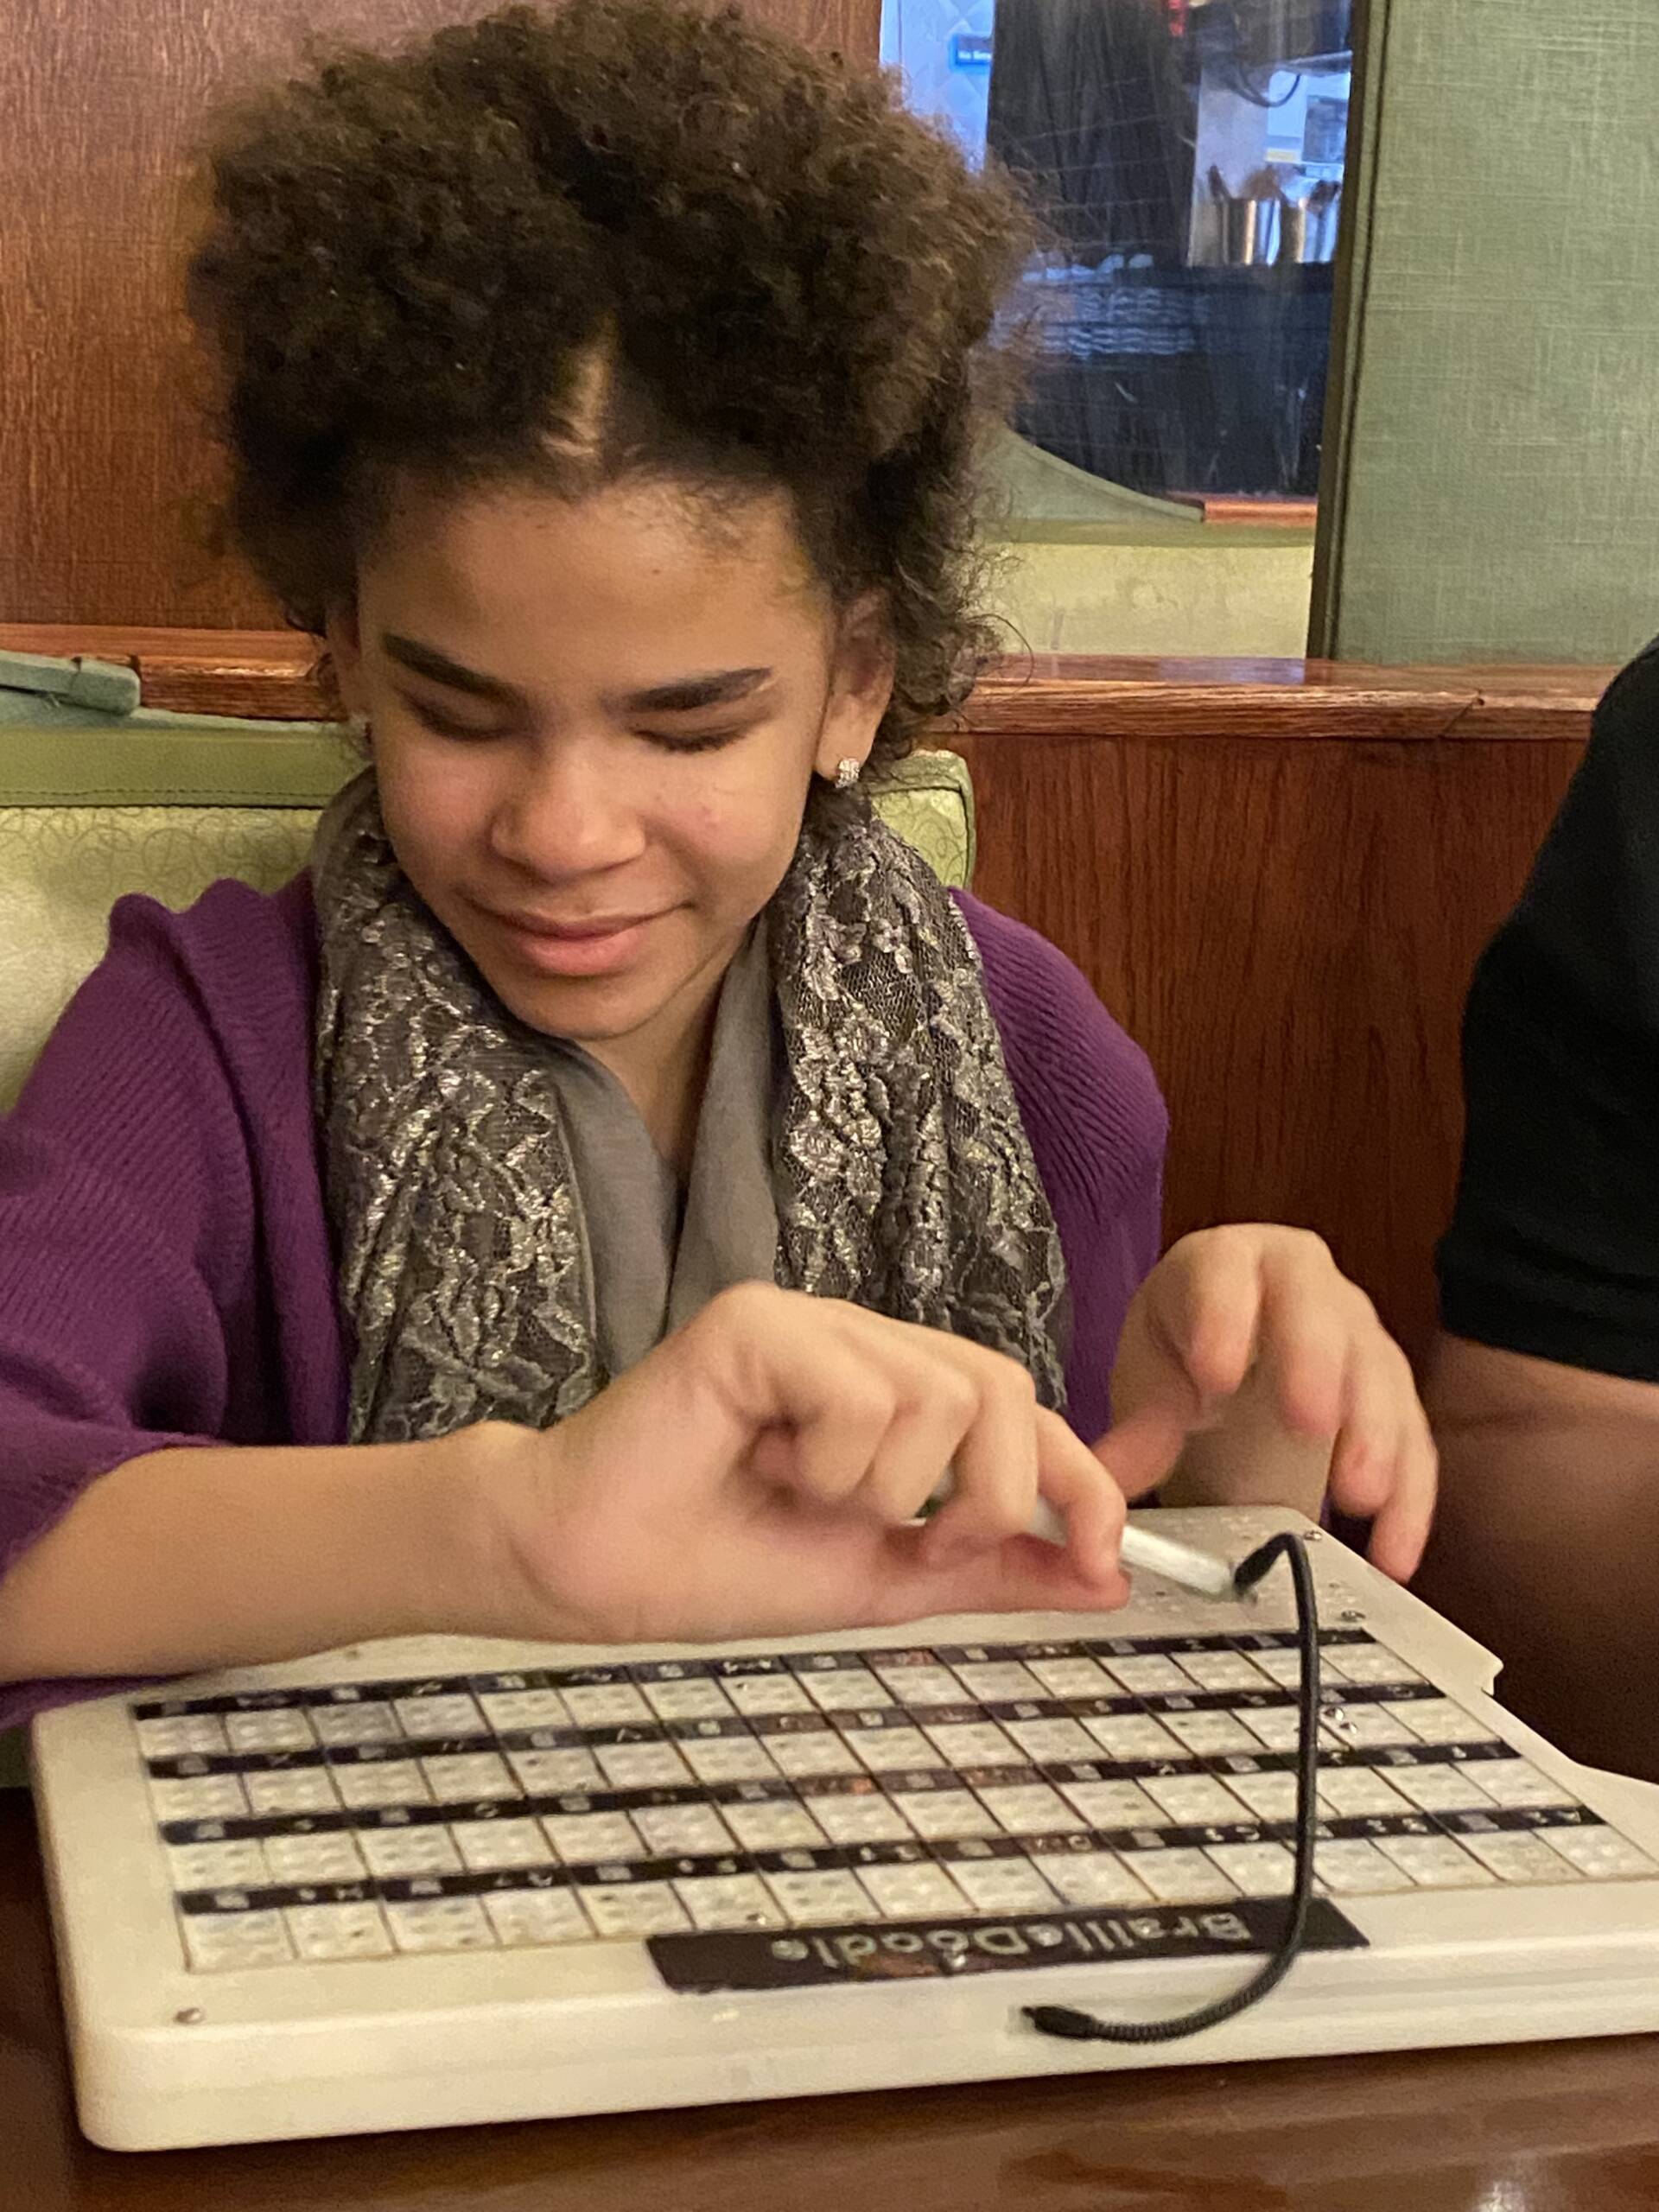 Millie, a 12-year-old Black girl, smiles while using her BrailleDoodle device